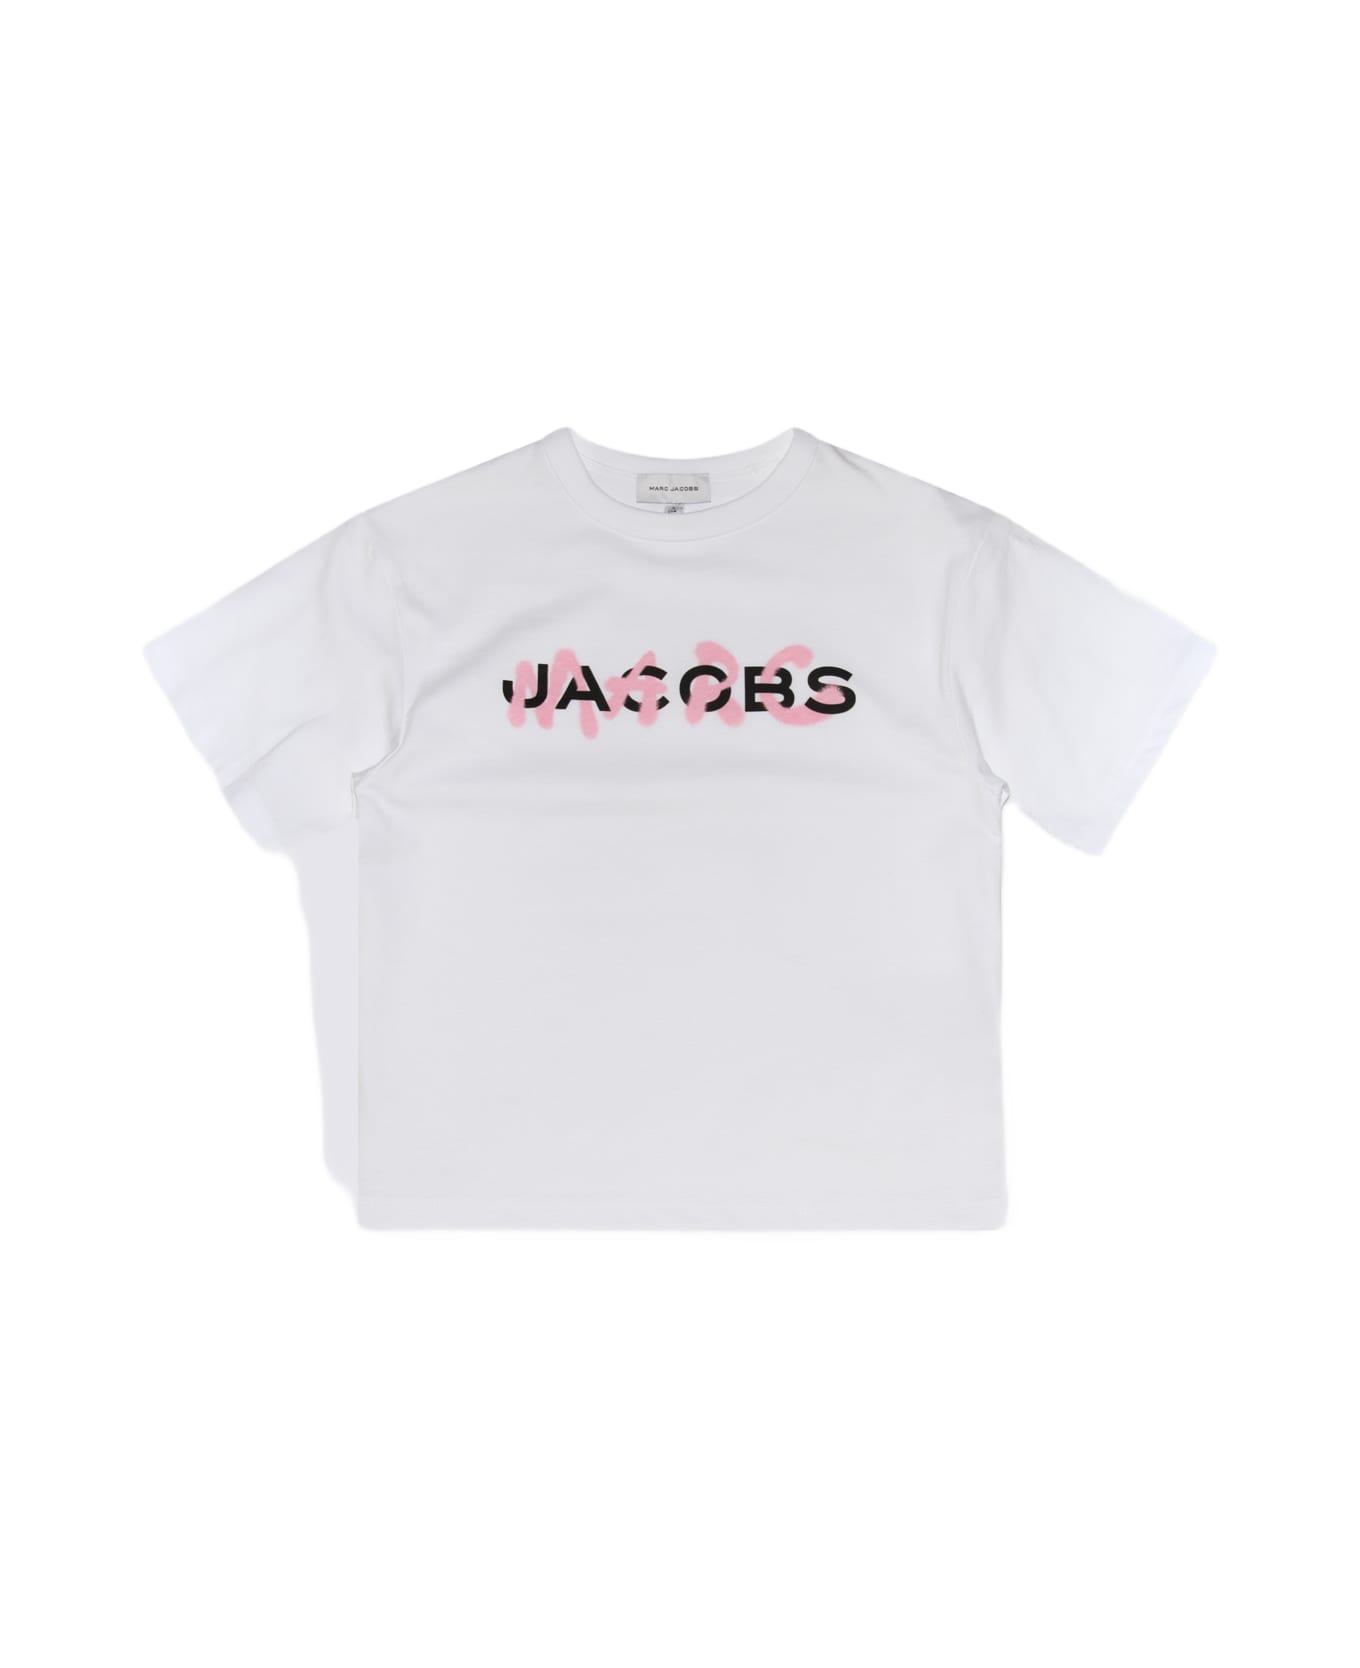 Marc Jacobs White, Pink And Black Cotton T-shirt - White